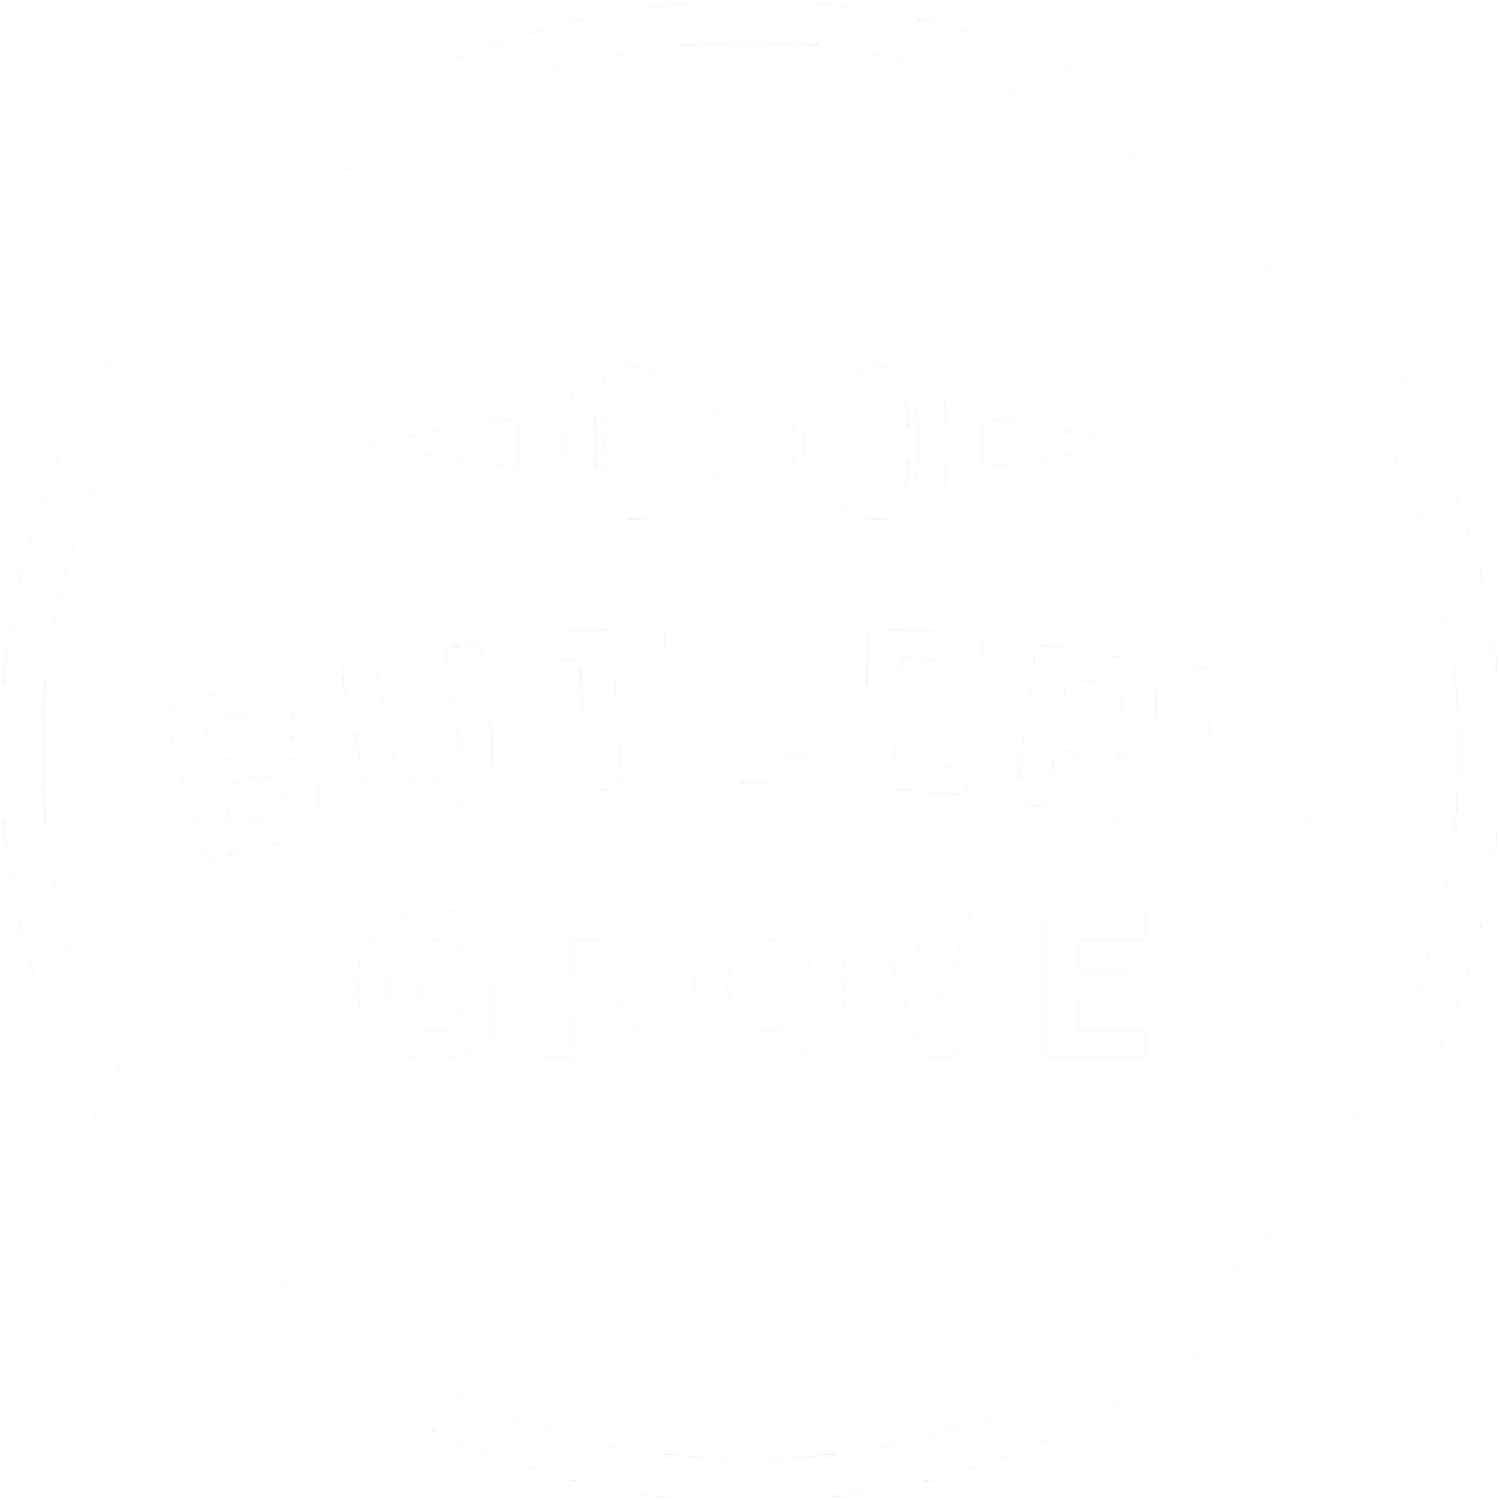 Butlers Grove